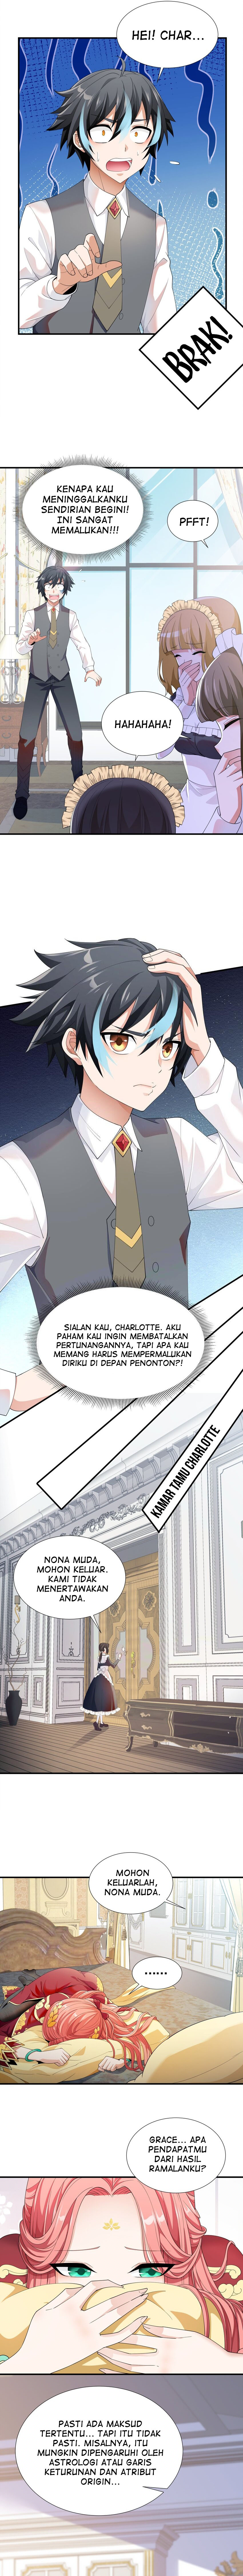 Dilarang COPAS - situs resmi www.mangacanblog.com - Komik little tyrant doesnt want to meet with a bad end 032 - chapter 32 33 Indonesia little tyrant doesnt want to meet with a bad end 032 - chapter 32 Terbaru 3|Baca Manga Komik Indonesia|Mangacan